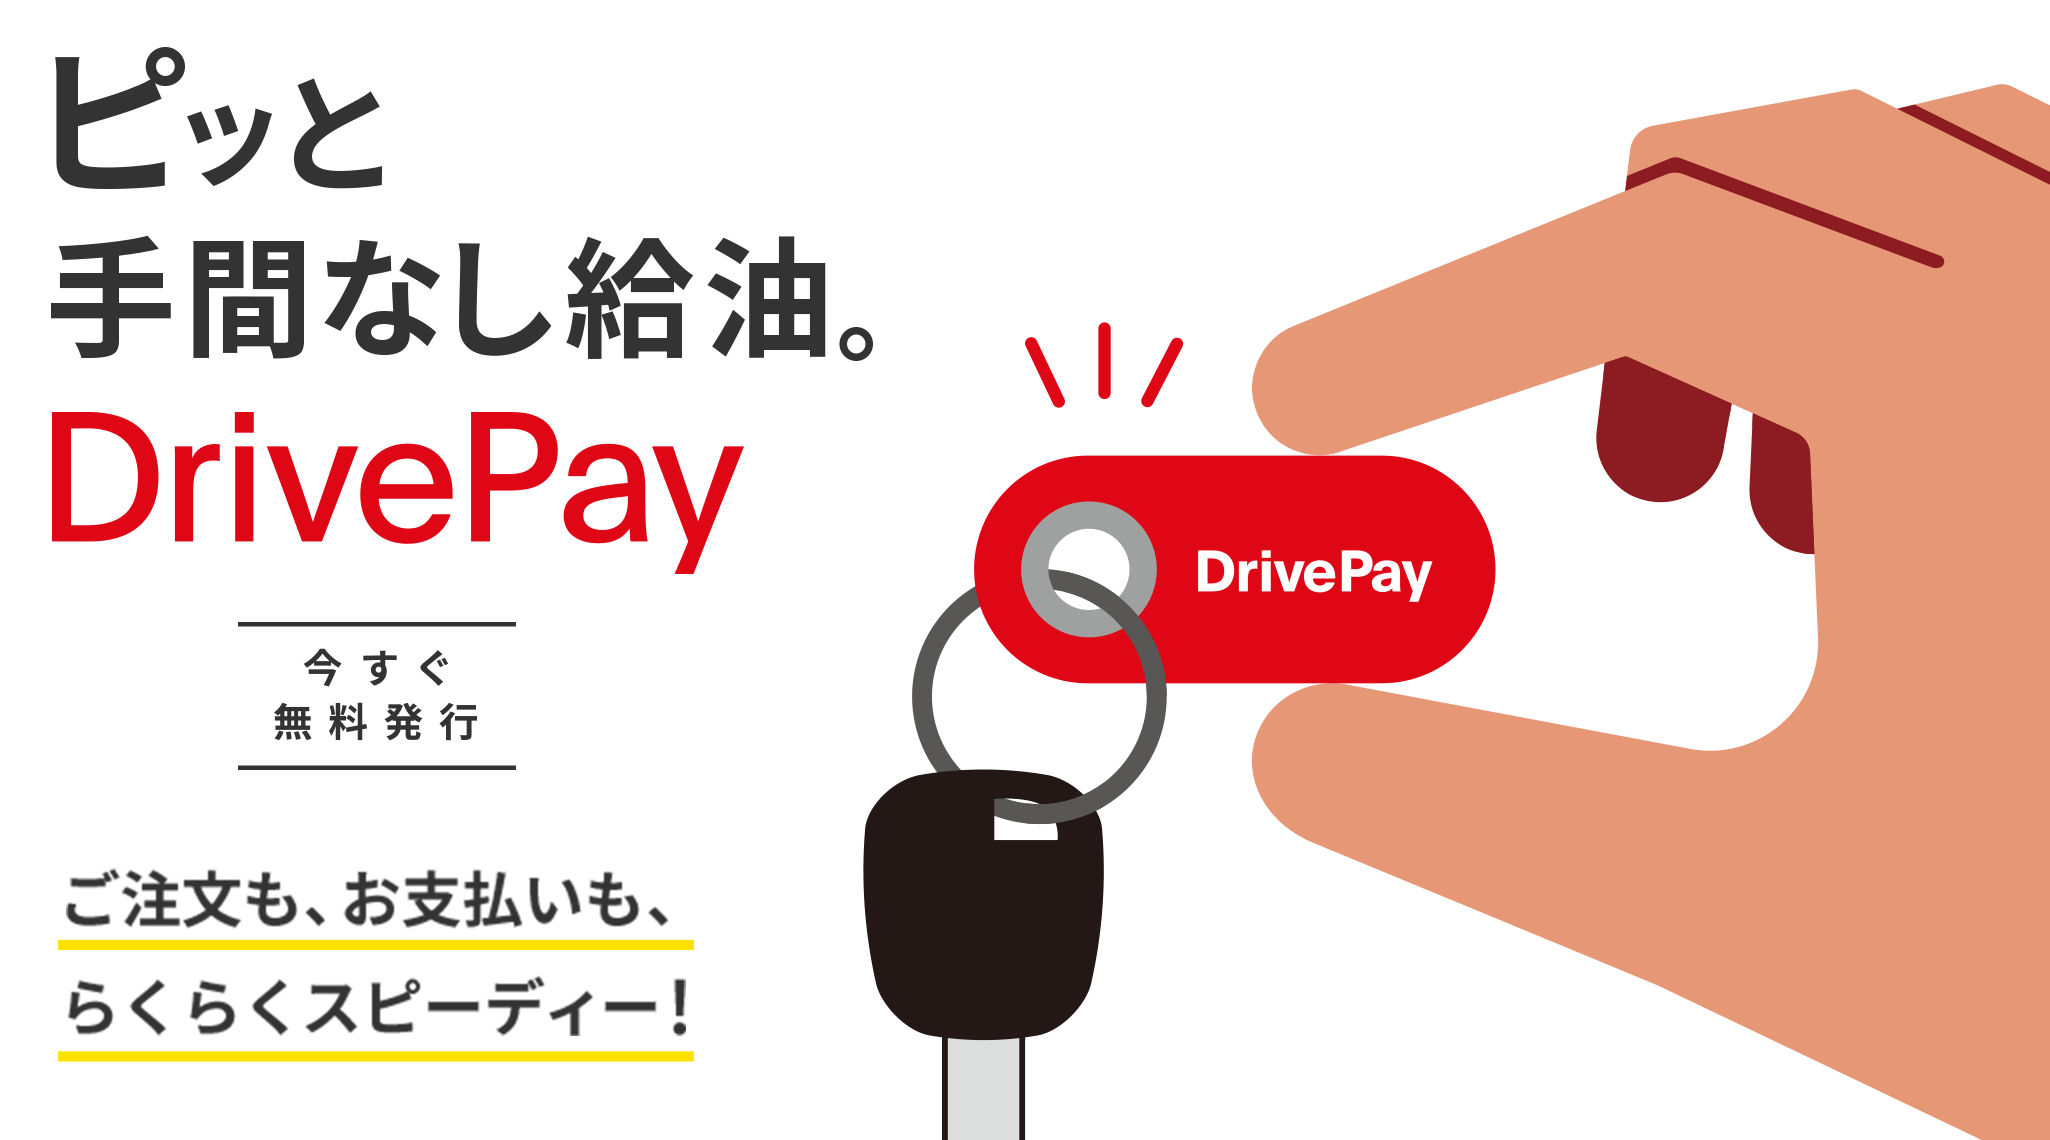 Free issue now Instant and hassle-free refueling. DrivePay Orders and payments are easy and fast!